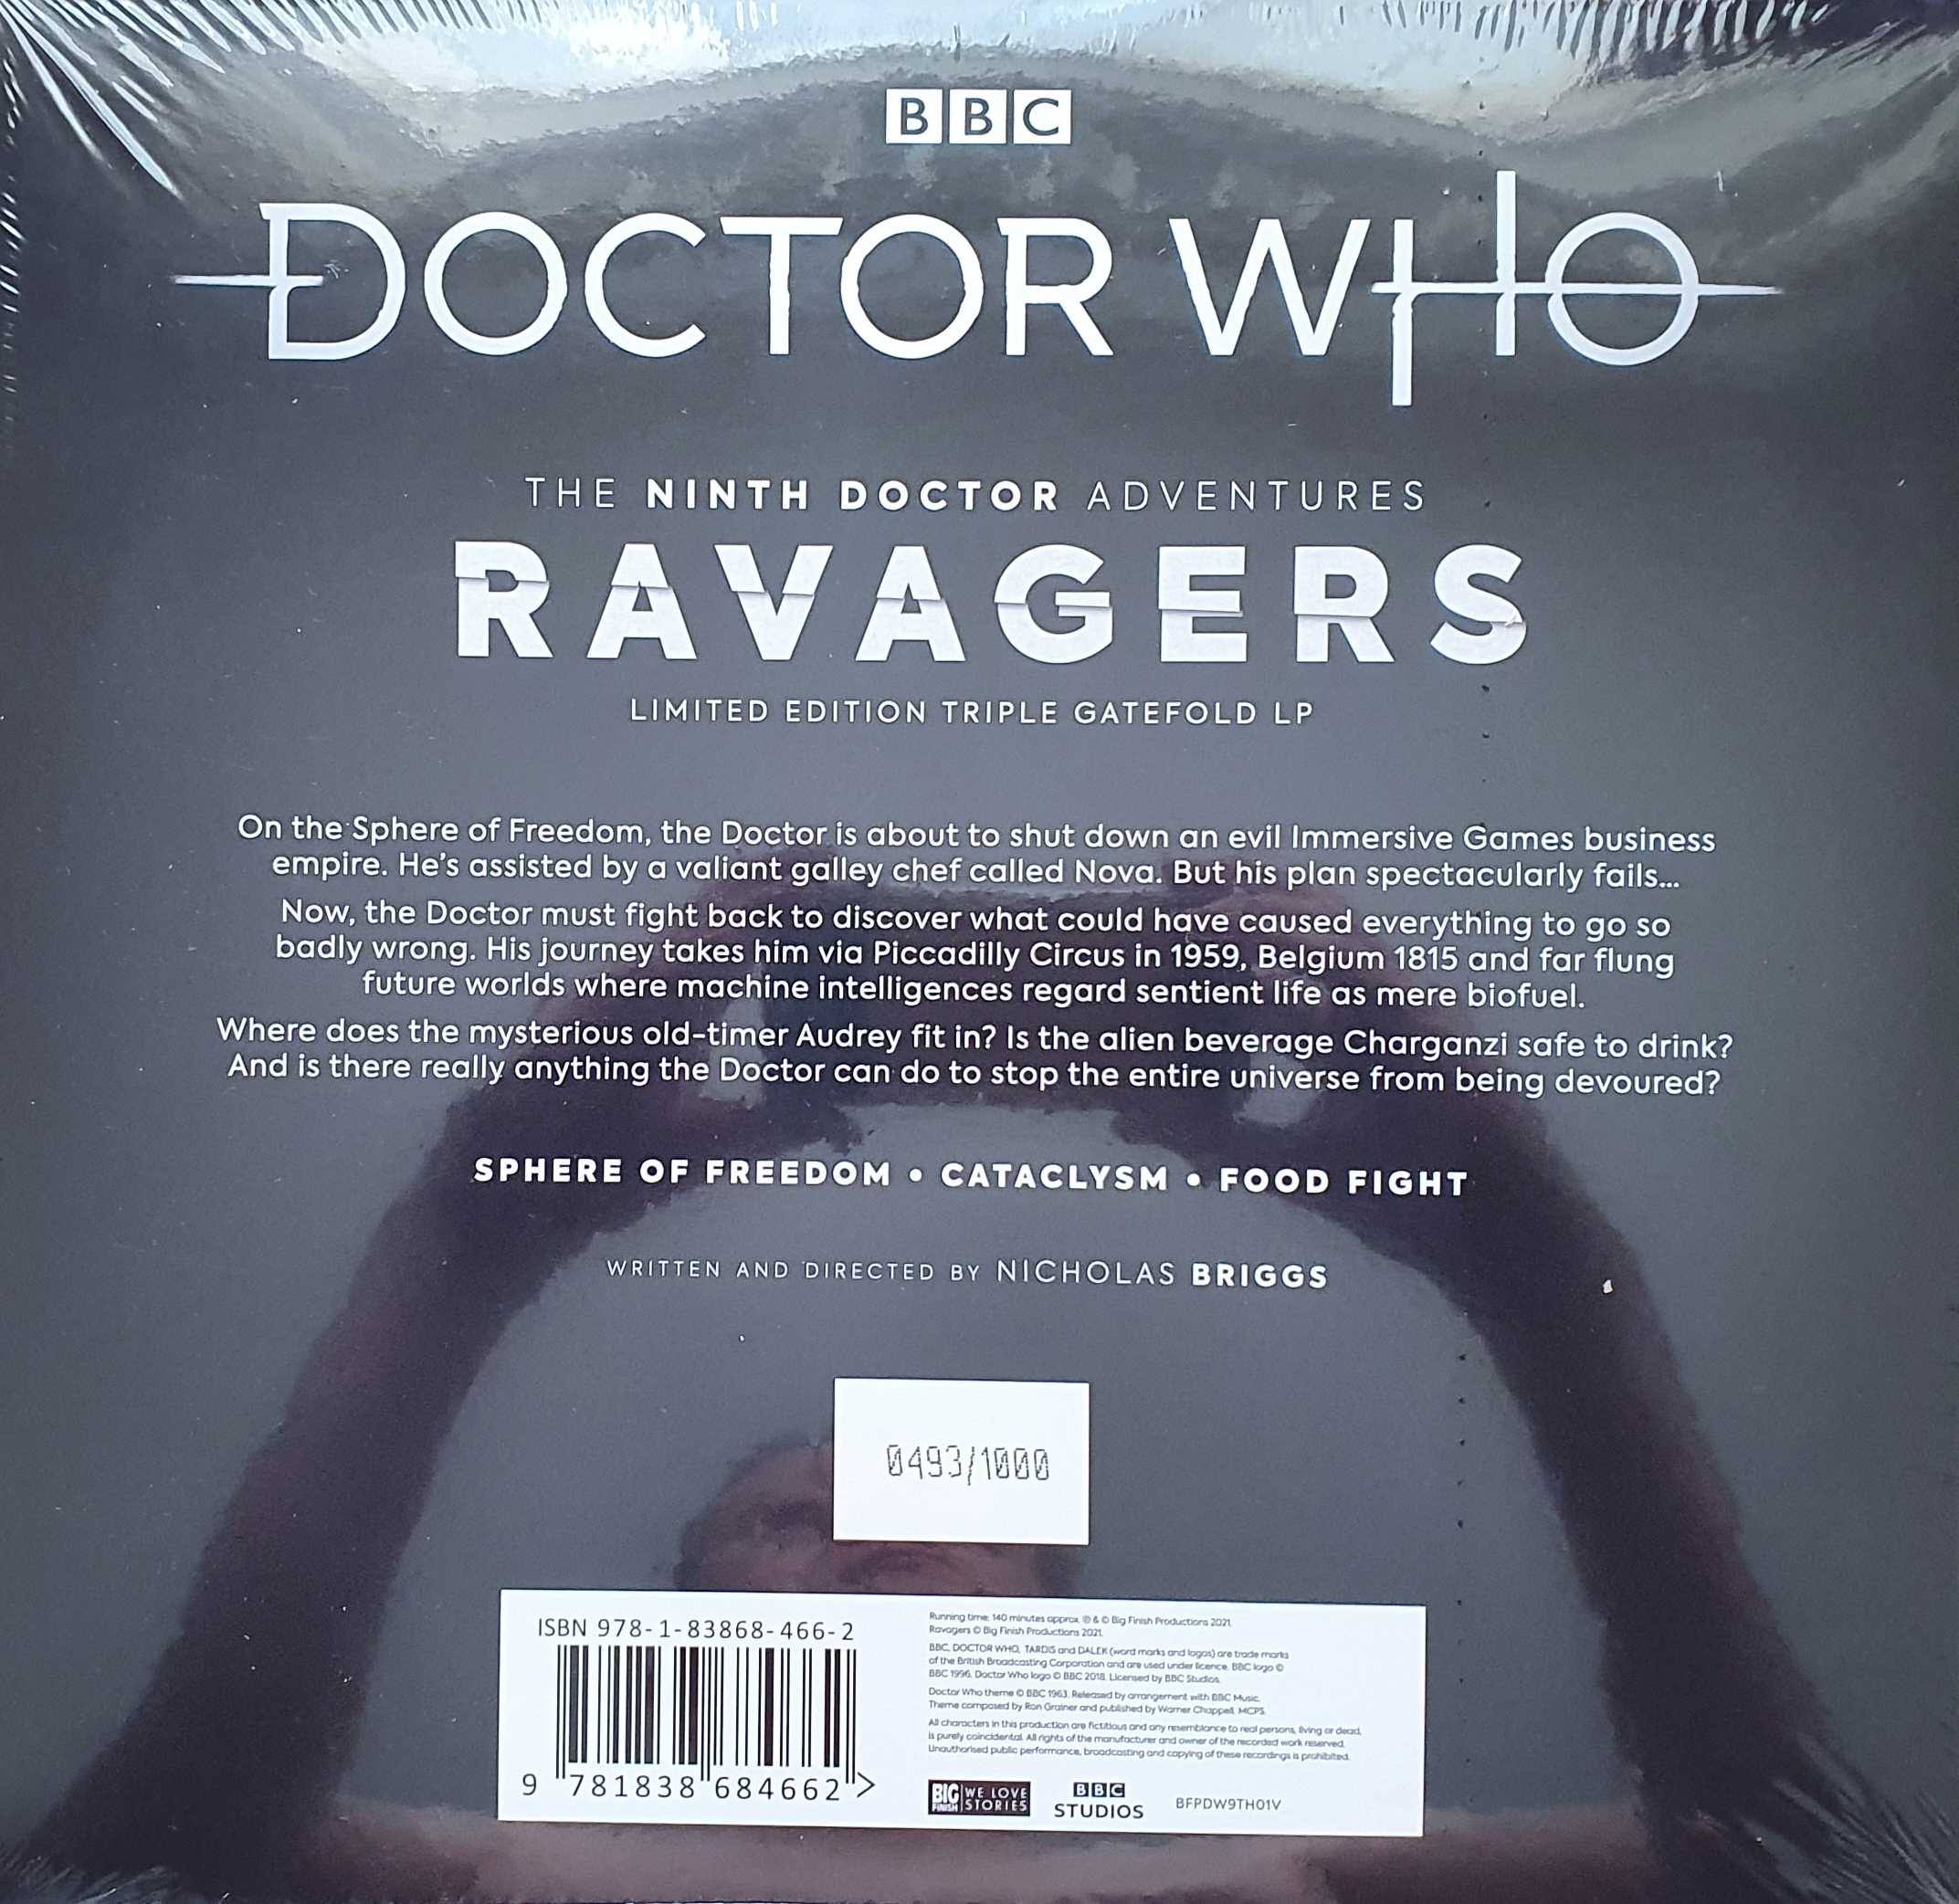 Picture of BFPDW9TH01V Doctor Who - Ravages by artist Nicholas Briggs from the BBC records and Tapes library